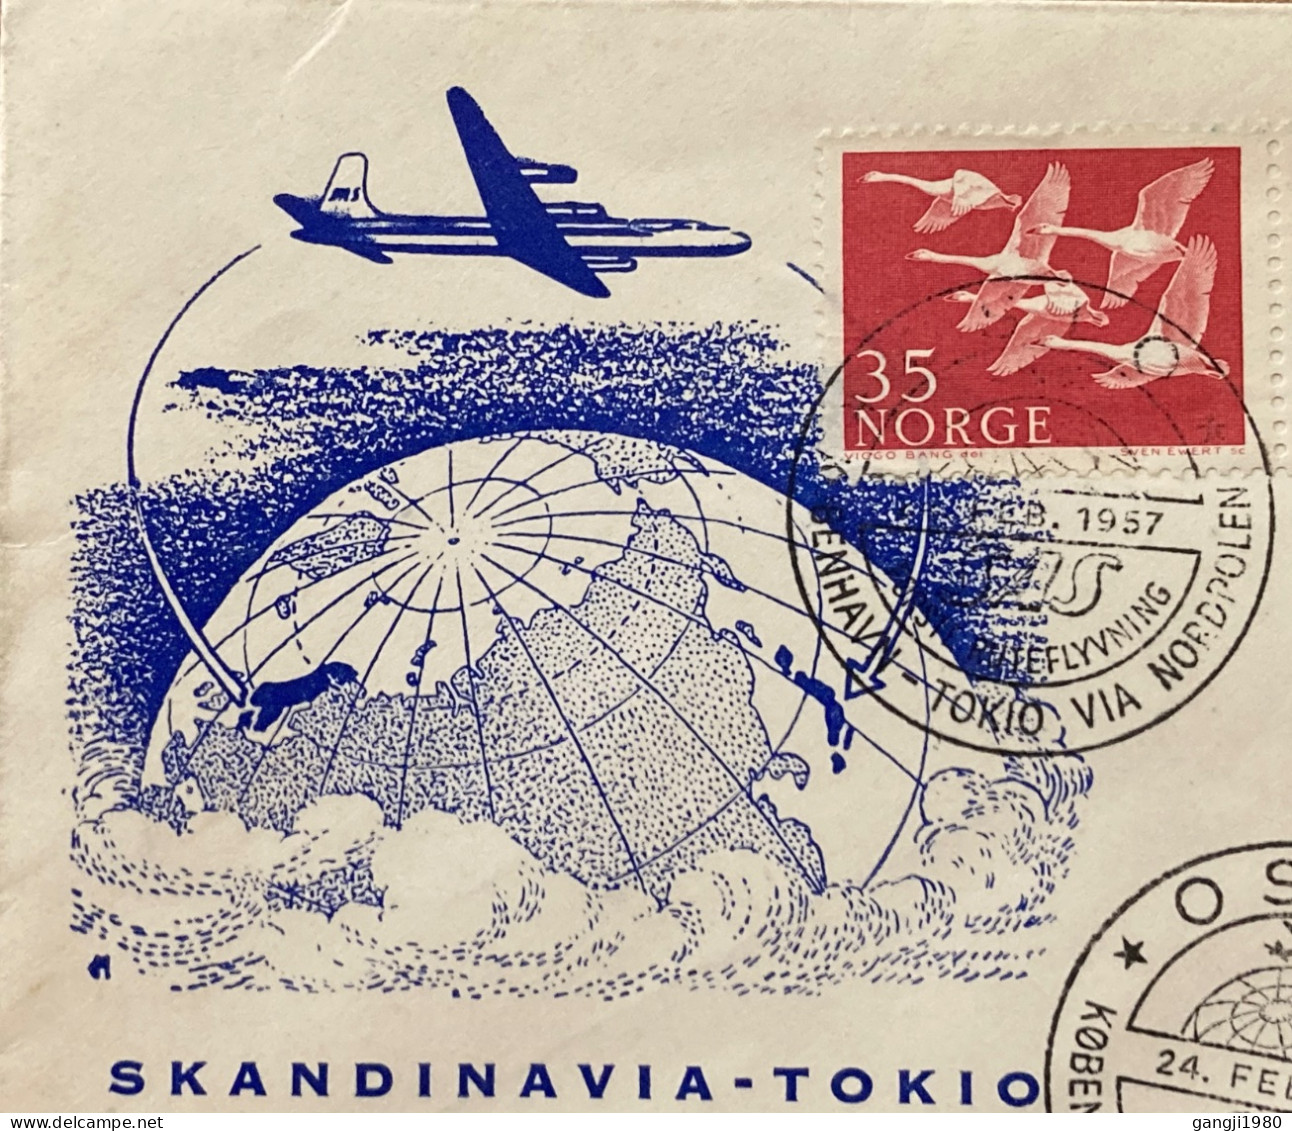 NORWAY 1957, FIRST FLIGHT COVER TO JAPAN, KOPEHAVEN -TO KYO VIA NORDPOLEN OSLO, TOKYO CITY CANCEL, ILLUSTRATE PLANE ON G - Covers & Documents